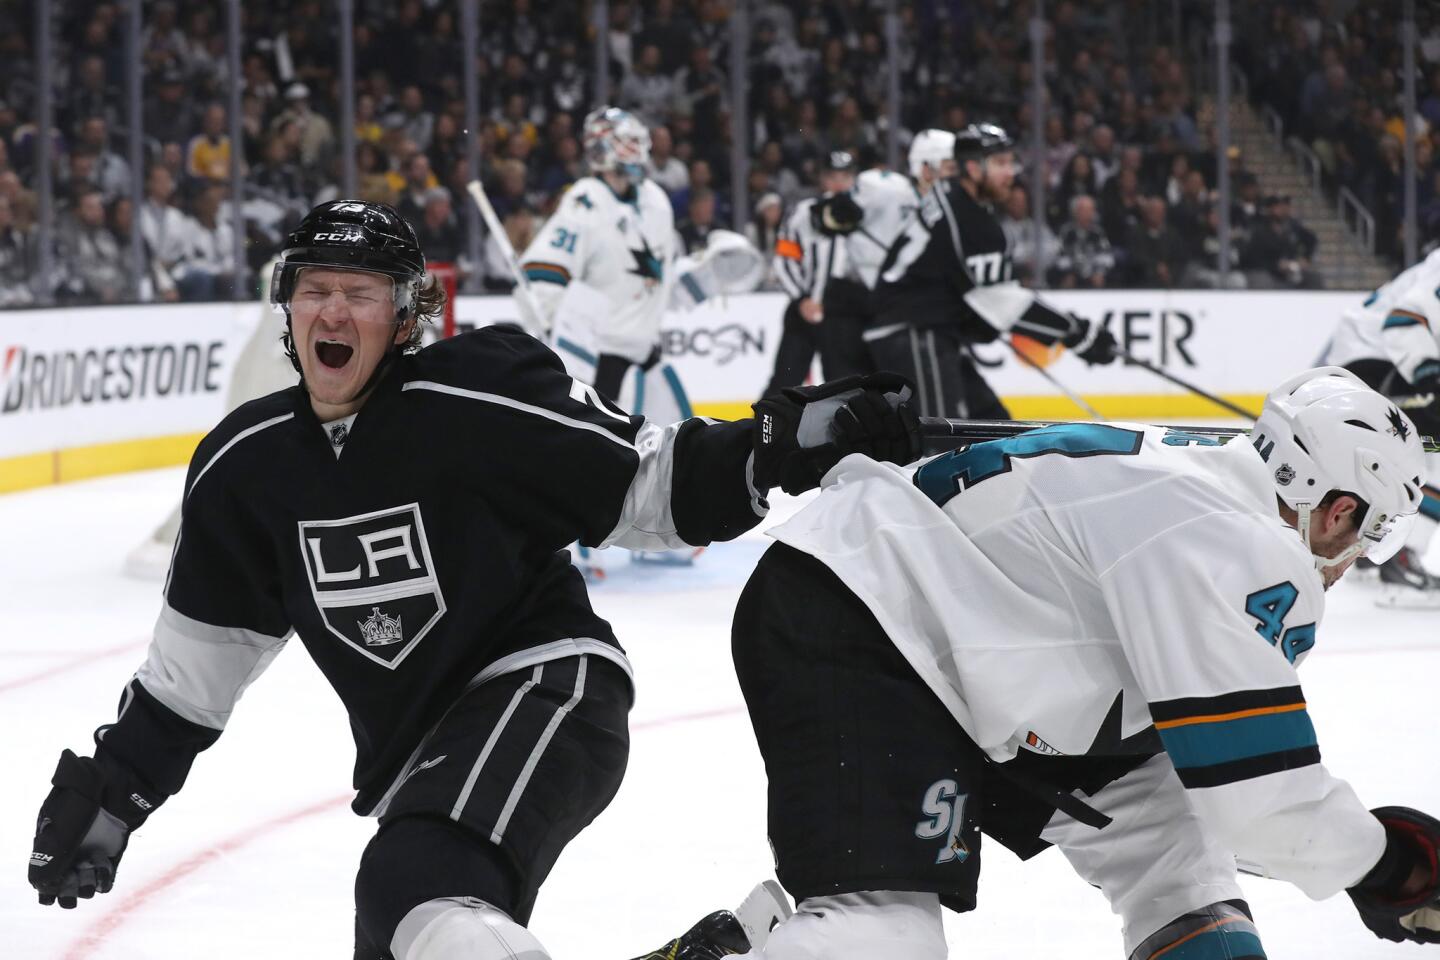 Kings forward Tyler Toffoli grimaces in pain after colliding with Sharks defenseman Marc-Edouard Vlasic during the third period of a game on April 22.